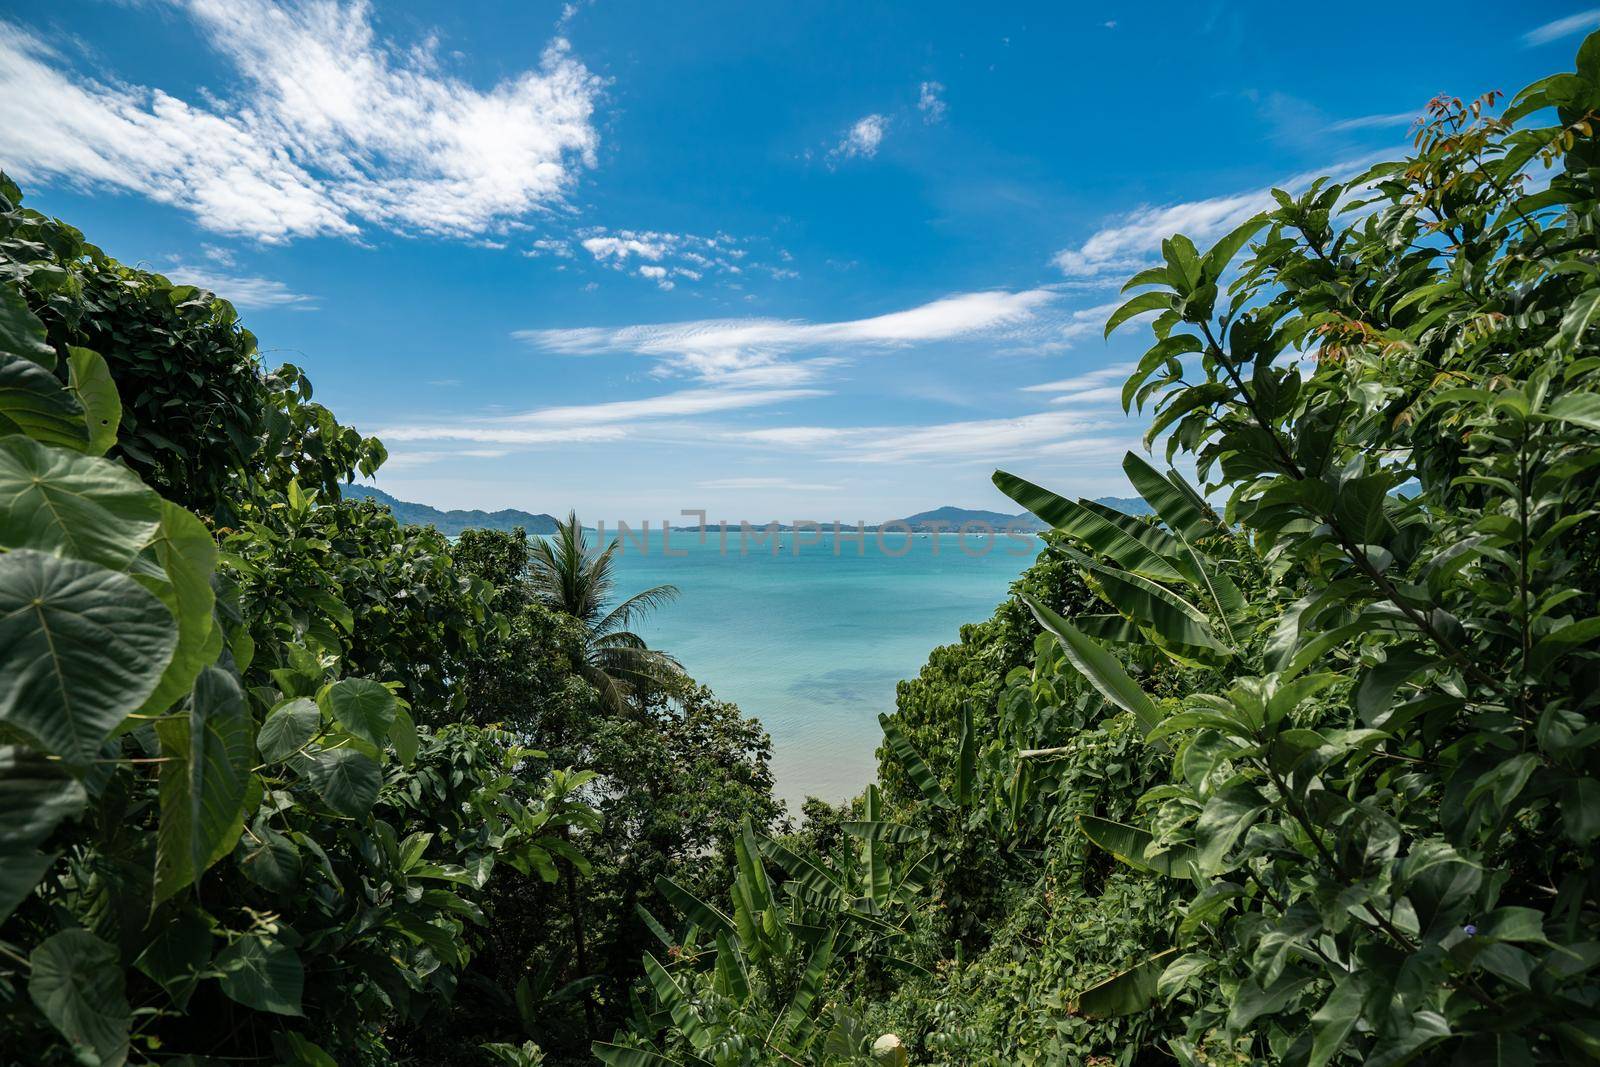 Tropical island with green trees on the foreground and beach, Phuket, Thailand. by sirawit99